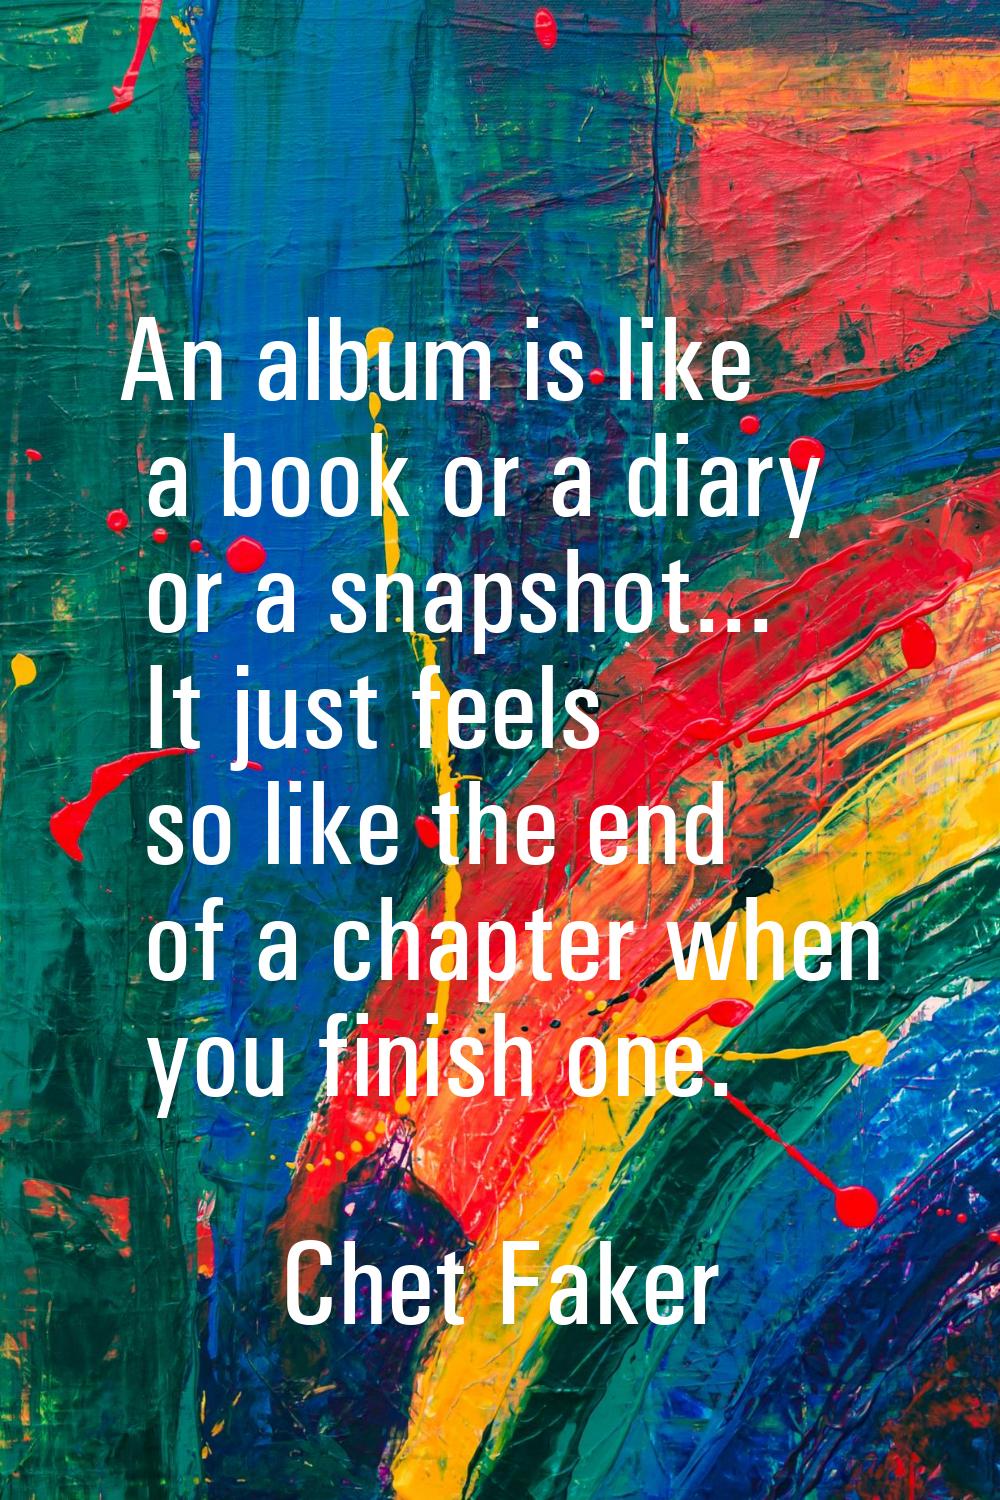 An album is like a book or a diary or a snapshot... It just feels so like the end of a chapter when